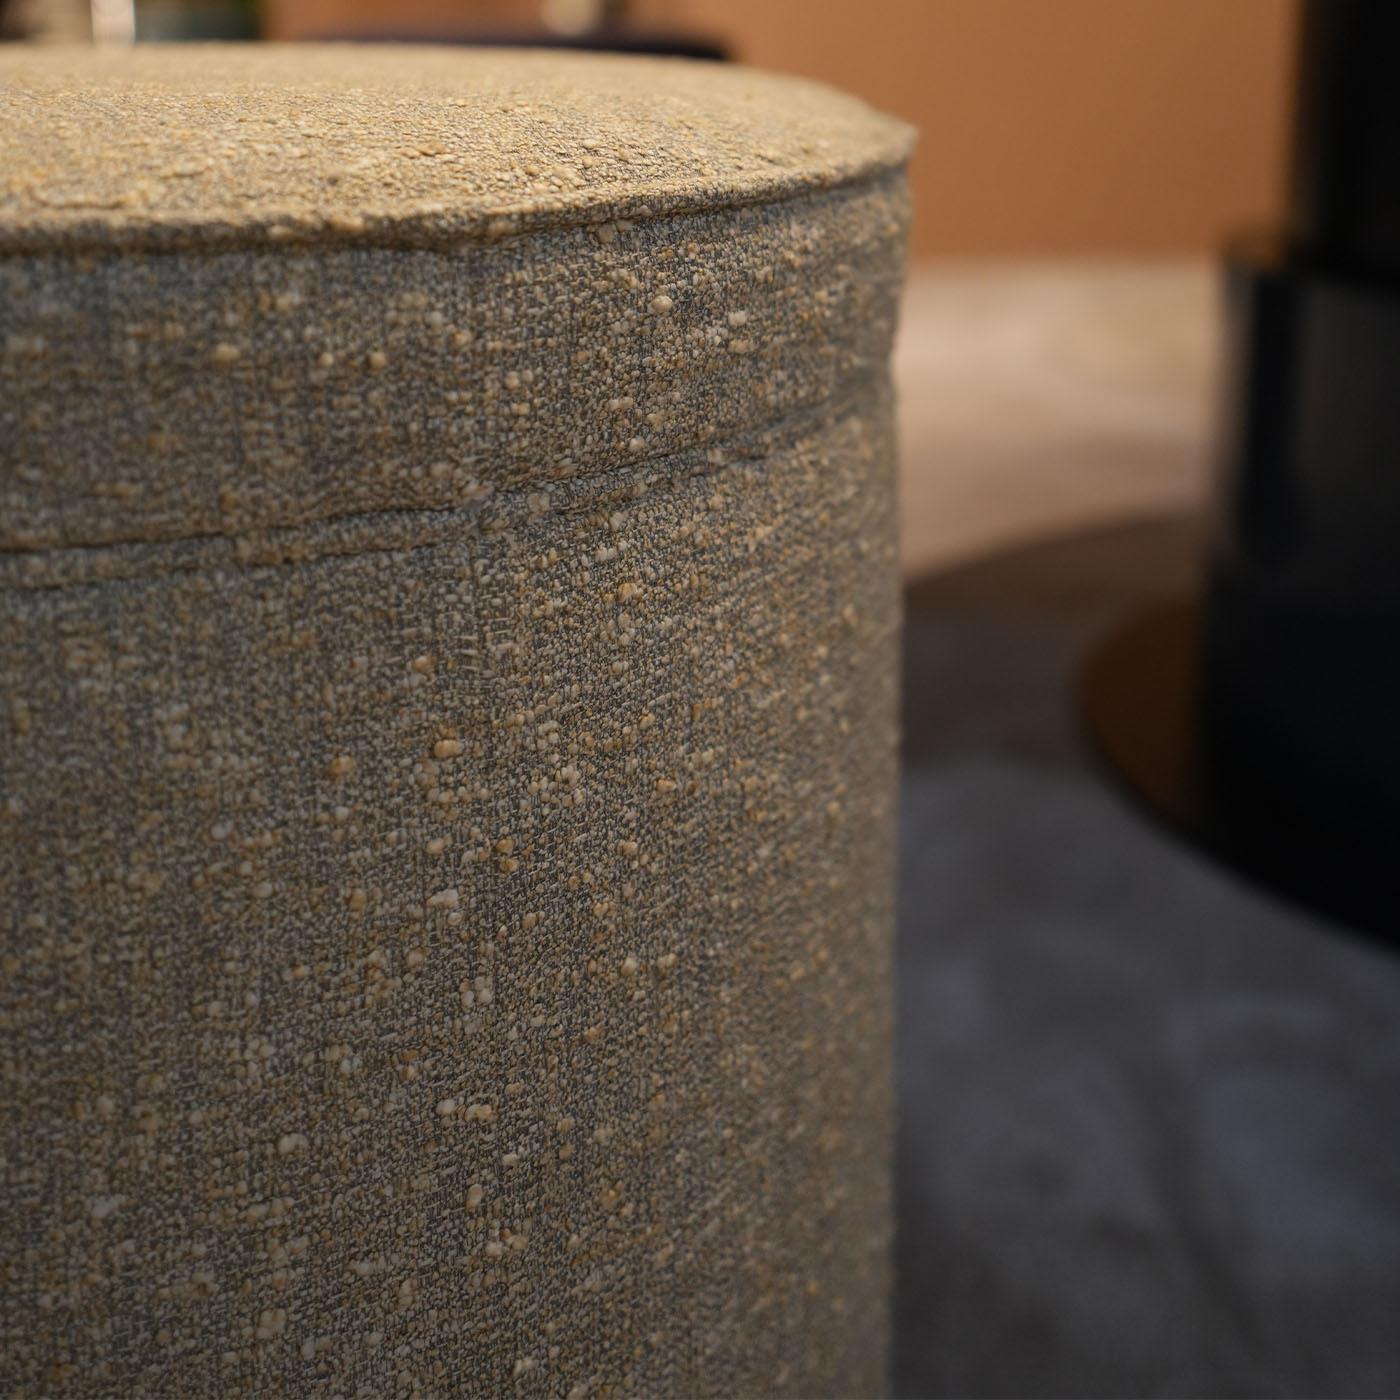 Utmost comfort and simplicity merge in this compact pouf, refined modern design precious as an occasional seat in a living room, walk-in closet, or bedroom, alike. An extra-soft melange gray fabric envelops its cylindrical silhouette, sealed by a